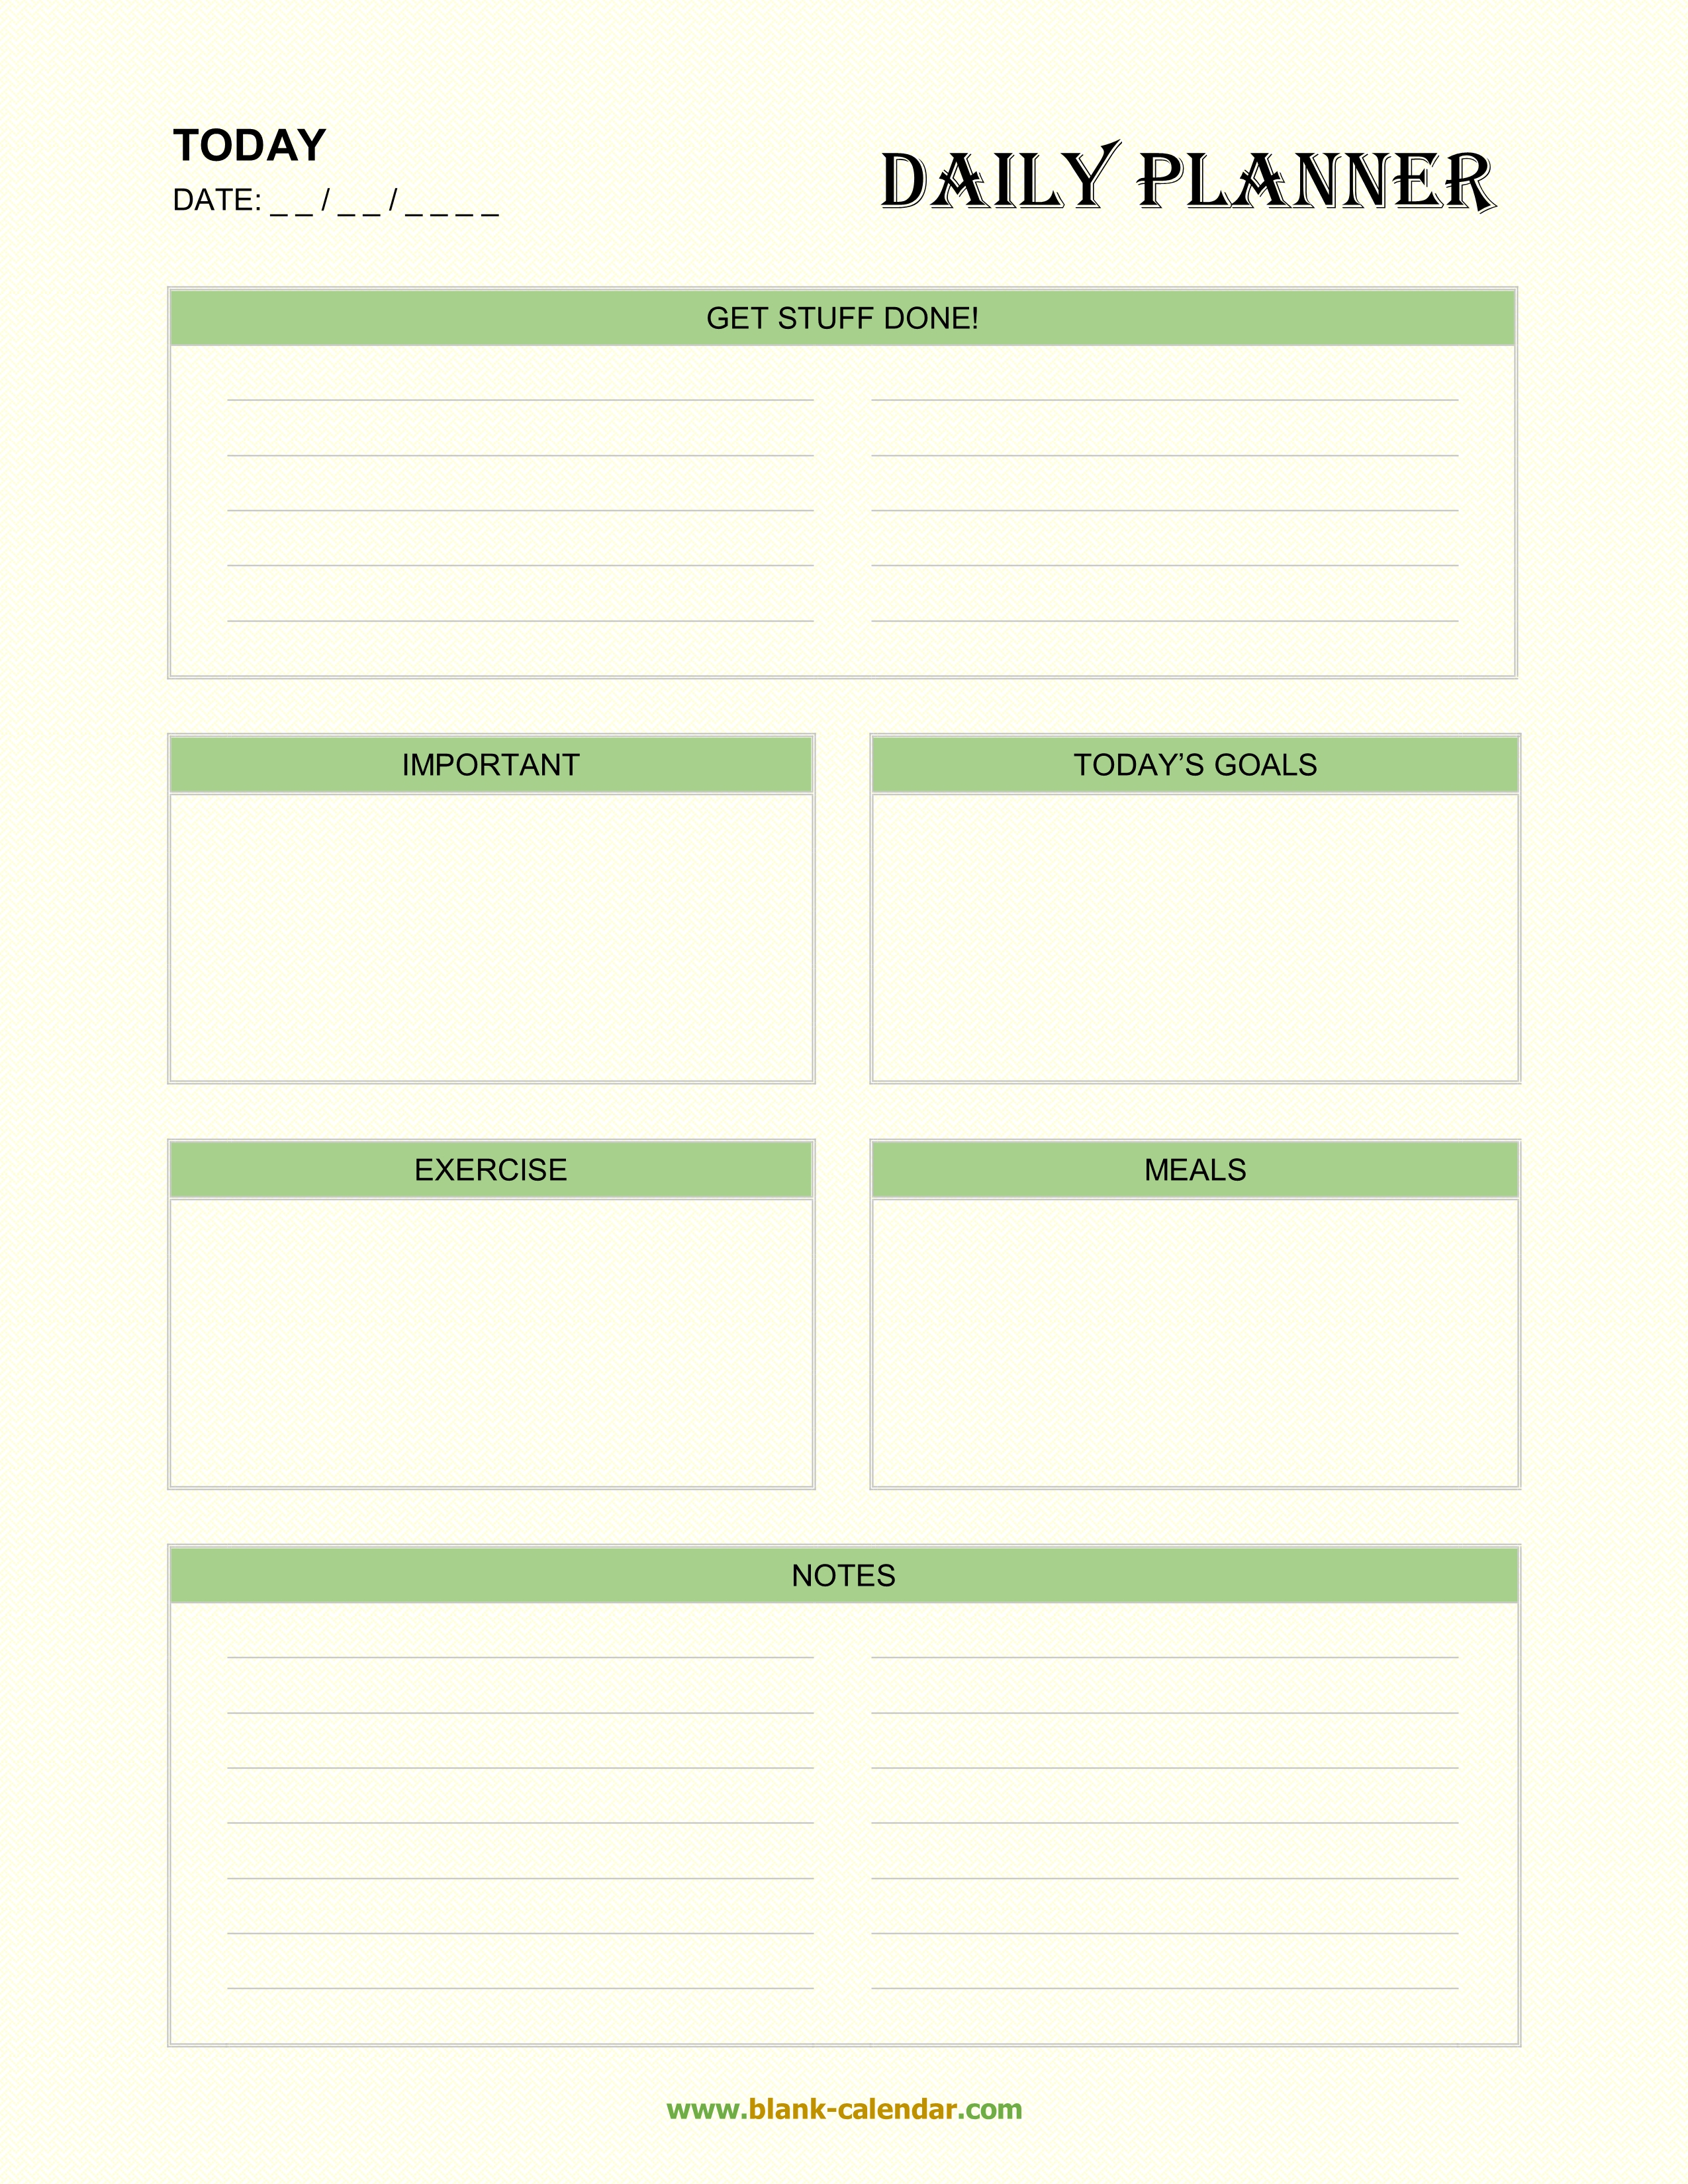 Blank Daily Schedule Pdf  Bolan.horizonconsulting.co with regard to Free Printable Daily Planner Template